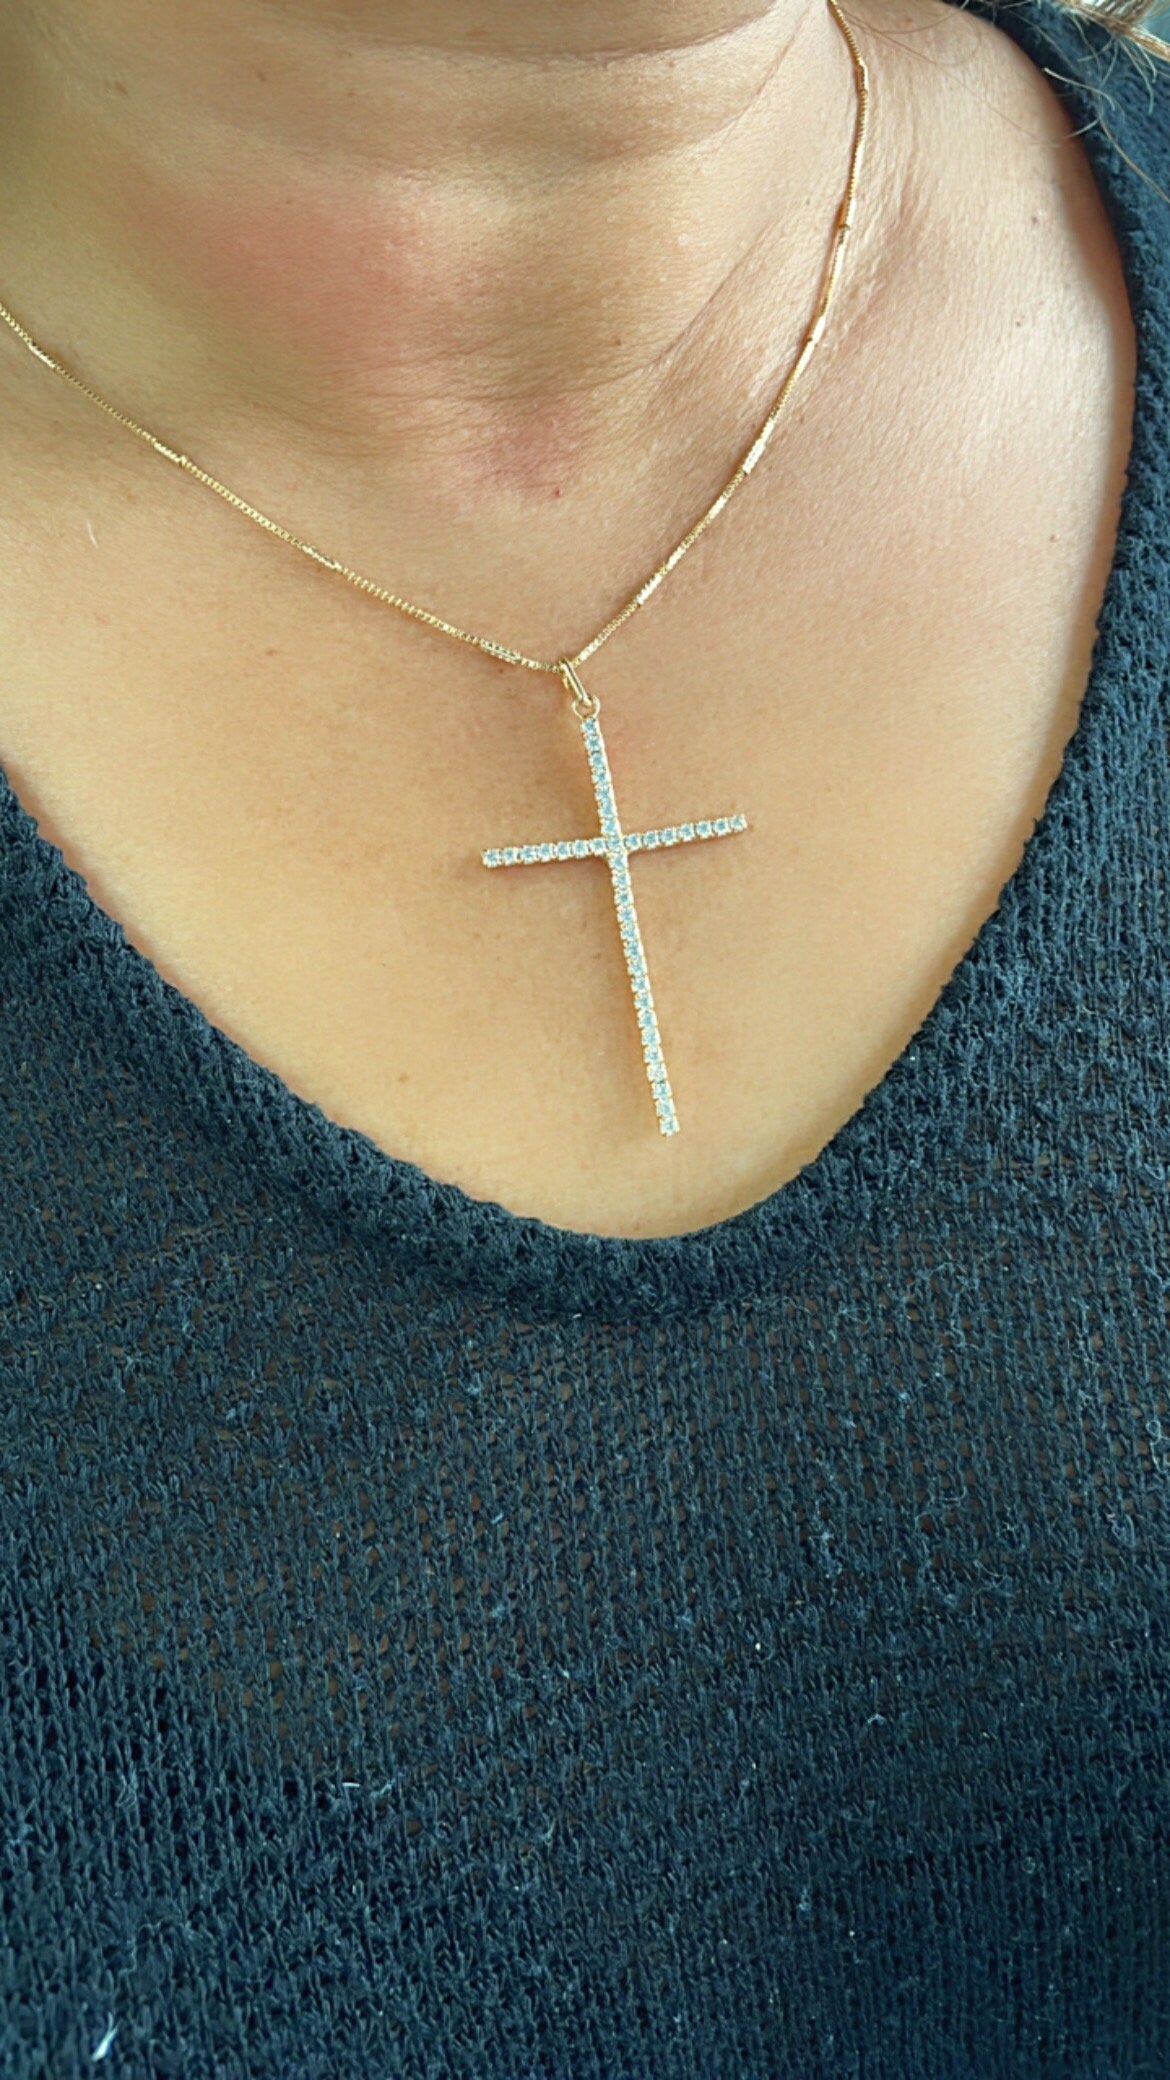 18k Gold Filled 1 Inch Tall Dainty Cross Pendant, Cross Jewlery, Cross Pendant, Religious Pendant